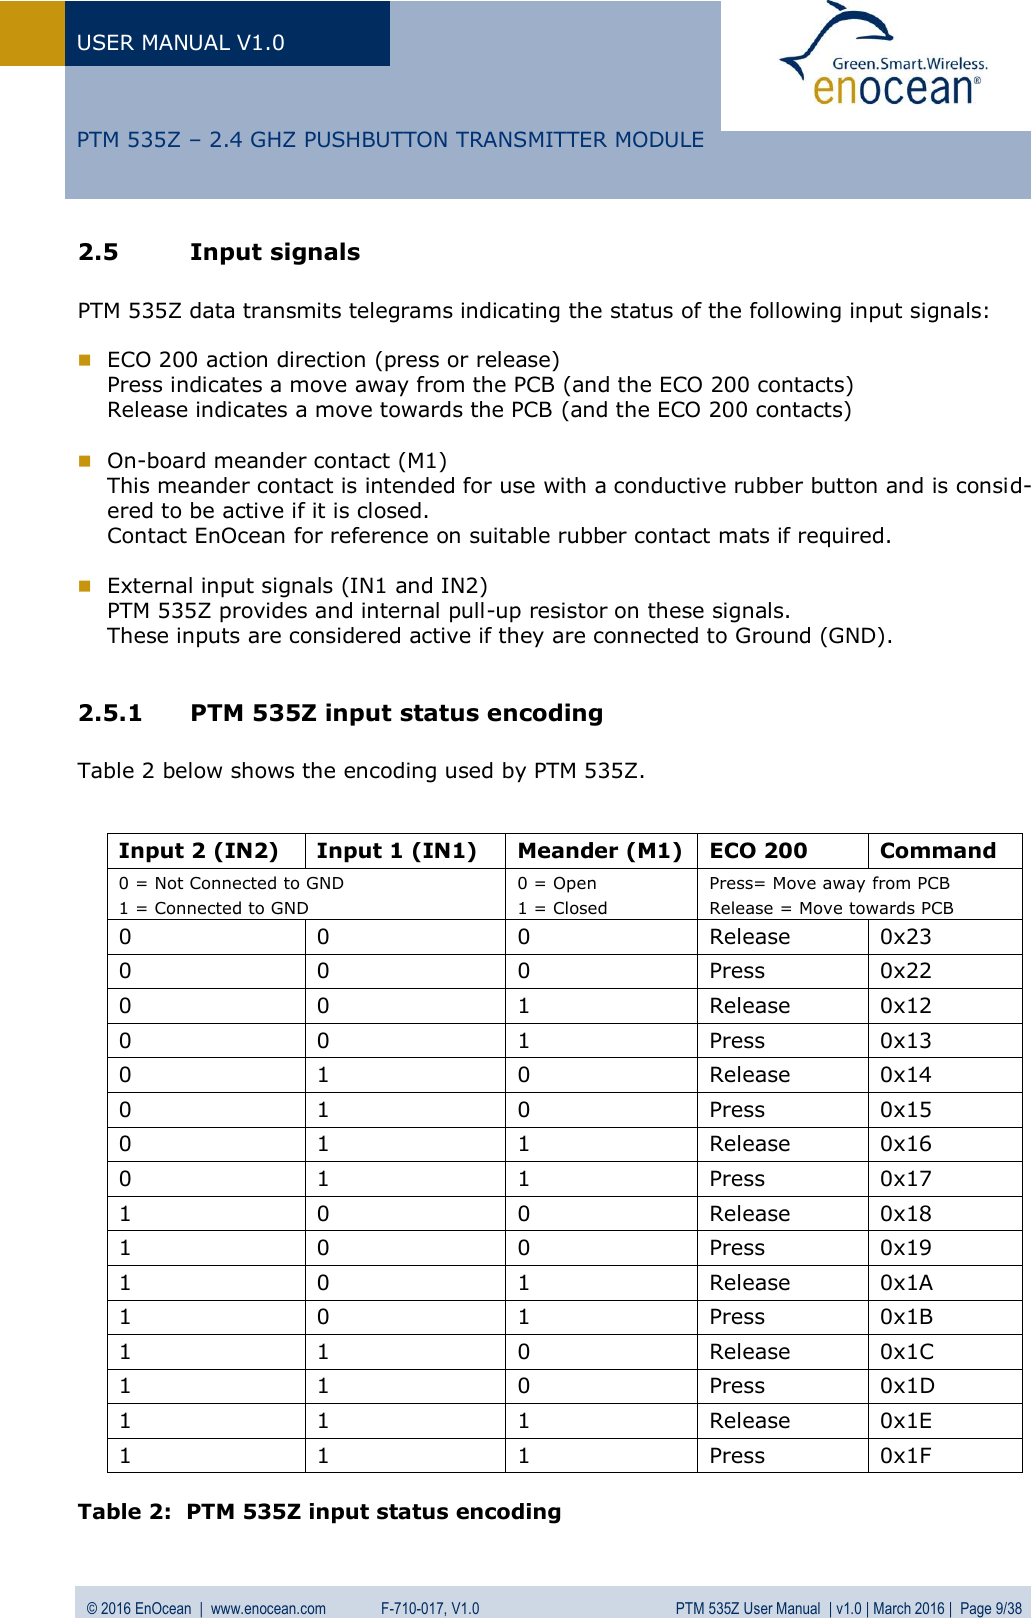 USER MANUAL V1.0   © 2016 EnOcean  |  www.enocean.com   F-710-017, V1.0          PTM 535Z User Manual  | v1.0 | March 2016 |  Page 9/38   PTM 535Z – 2.4 GHZ PUSHBUTTON TRANSMITTER MODULE 2.5 Input signals  PTM 535Z data transmits telegrams indicating the status of the following input signals:   ECO 200 action direction (press or release) Press indicates a move away from the PCB (and the ECO 200 contacts) Release indicates a move towards the PCB (and the ECO 200 contacts)   On-board meander contact (M1) This meander contact is intended for use with a conductive rubber button and is consid-ered to be active if it is closed. Contact EnOcean for reference on suitable rubber contact mats if required.   External input signals (IN1 and IN2) PTM 535Z provides and internal pull-up resistor on these signals.  These inputs are considered active if they are connected to Ground (GND).   2.5.1 PTM 535Z input status encoding  Table 2 below shows the encoding used by PTM 535Z.   Input 2 (IN2) Input 1 (IN1) Meander (M1) ECO 200 Command 0 = Not Connected to GND 1 = Connected to GND 0 = Open 1 = Closed Press= Move away from PCB Release = Move towards PCB 0  0 0 Release 0x23 0 0 0 Press 0x22  0 0 1 Release 0x12 0 0 1 Press 0x13 0 1 0 Release 0x14 0 1 0 Press 0x15  0 1 1 Release 0x16  0 1 1 Press 0x17  1 0 0 Release 0x18  1 0 0 Press 0x19 1 0 1 Release 0x1A 1 0 1 Press 0x1B 1 1 0 Release 0x1C 1 1 0 Press 0x1D 1 1 1 Release 0x1E 1 1 1 Press 0x1F  Table 2:  PTM 535Z input status encoding  